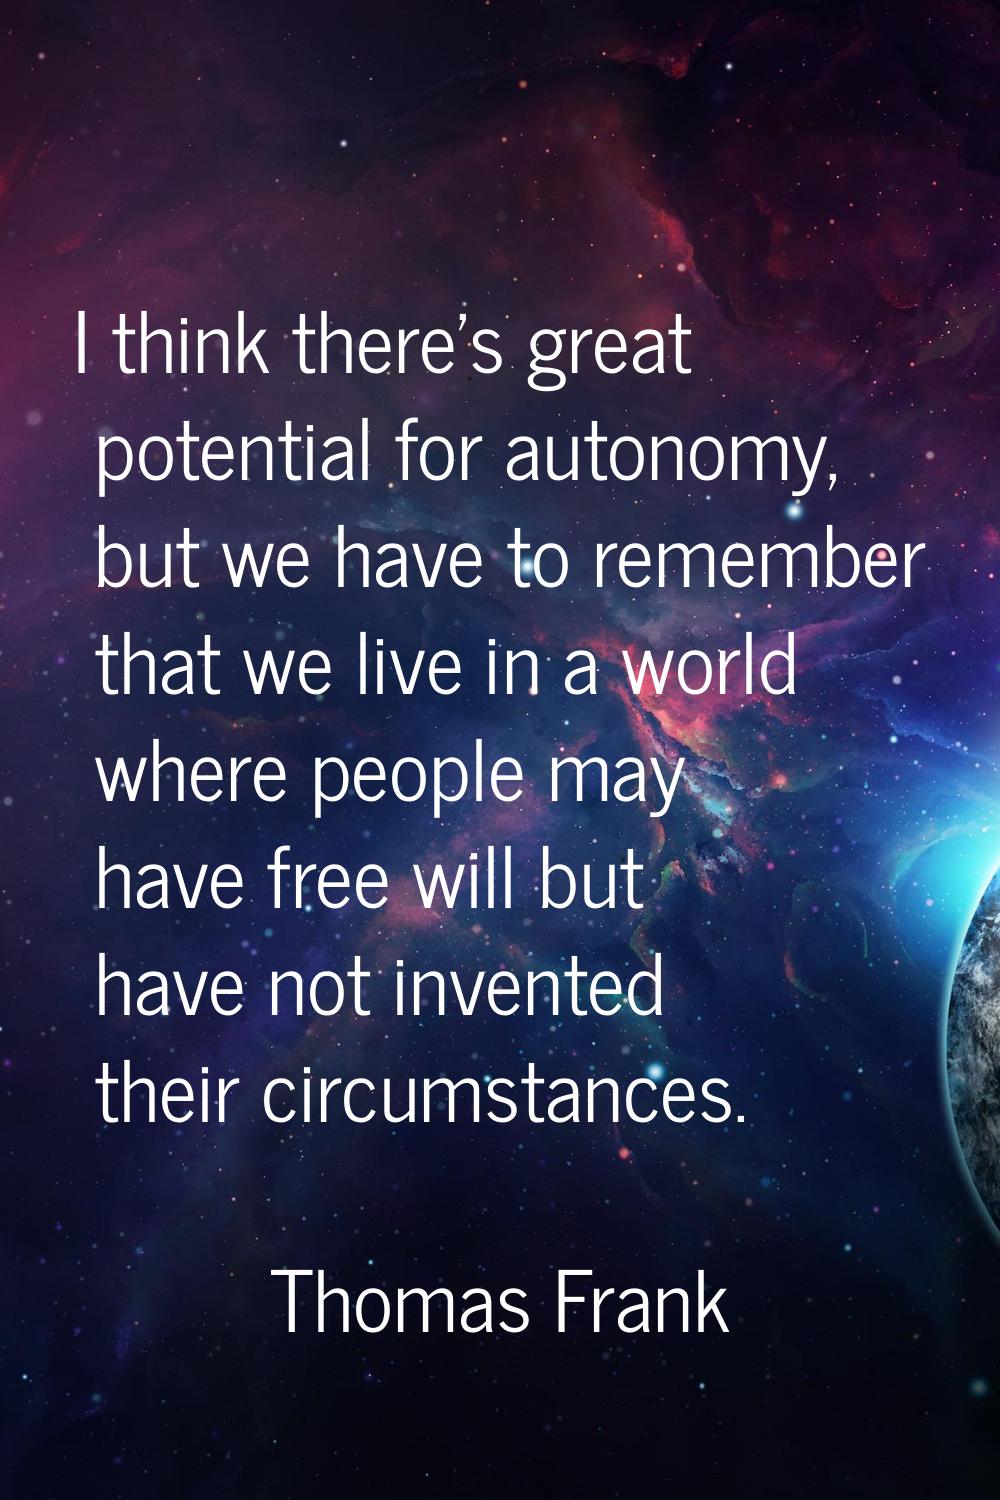 I think there's great potential for autonomy, but we have to remember that we live in a world where